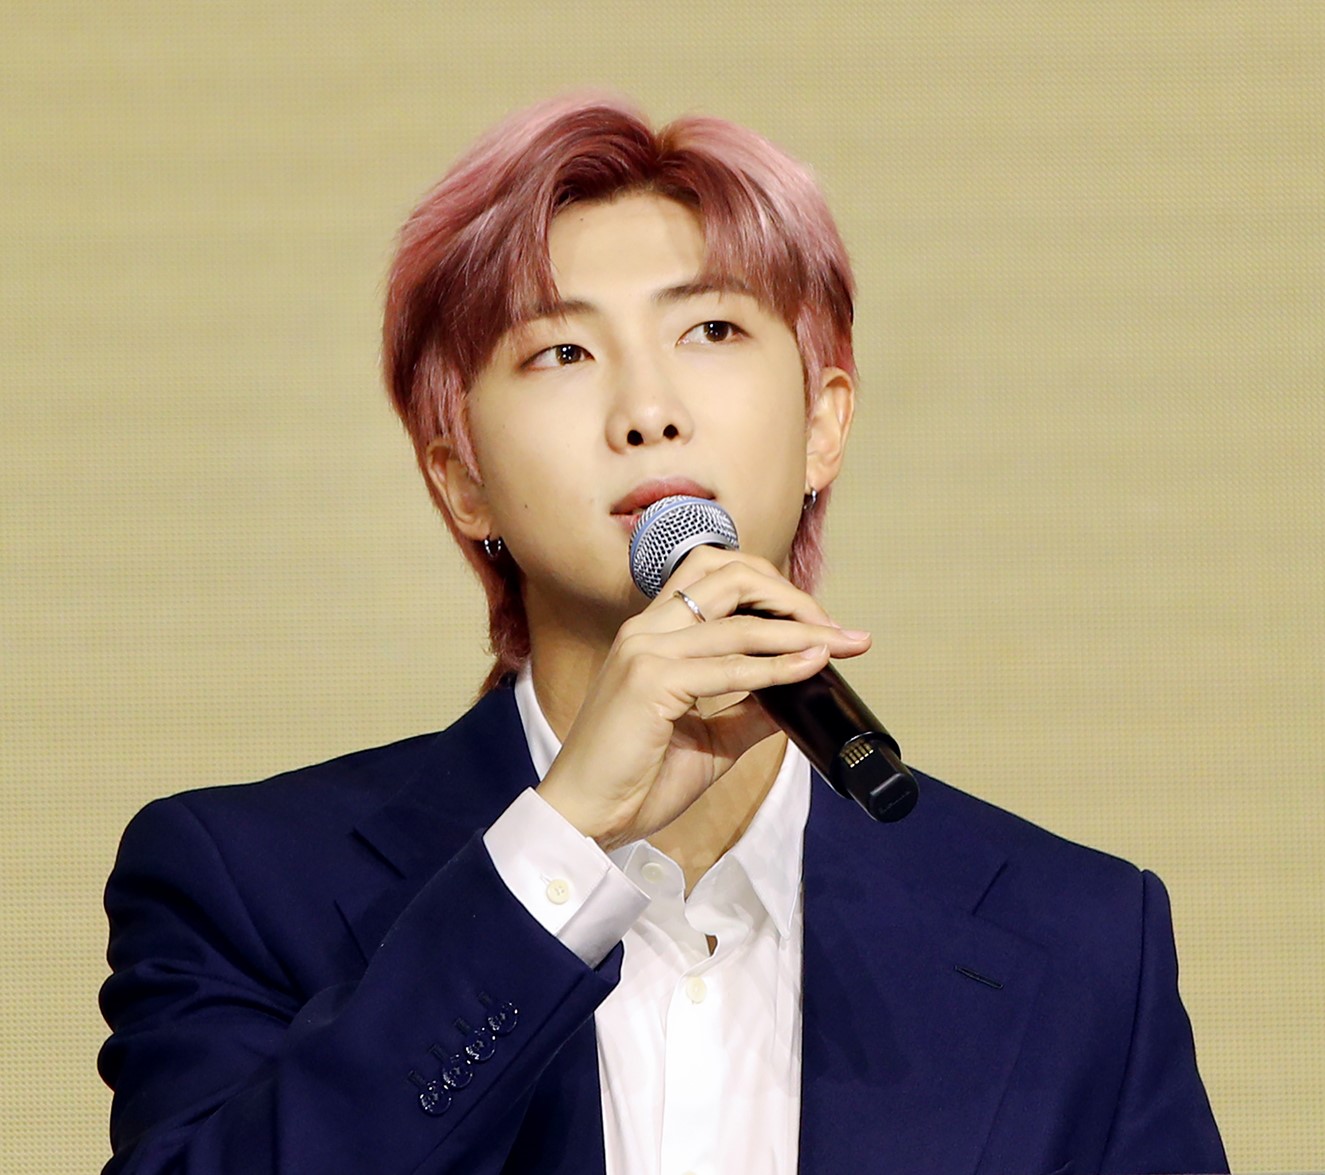 RM of BTS in a blue suit jacket and white shirt holding a microphone